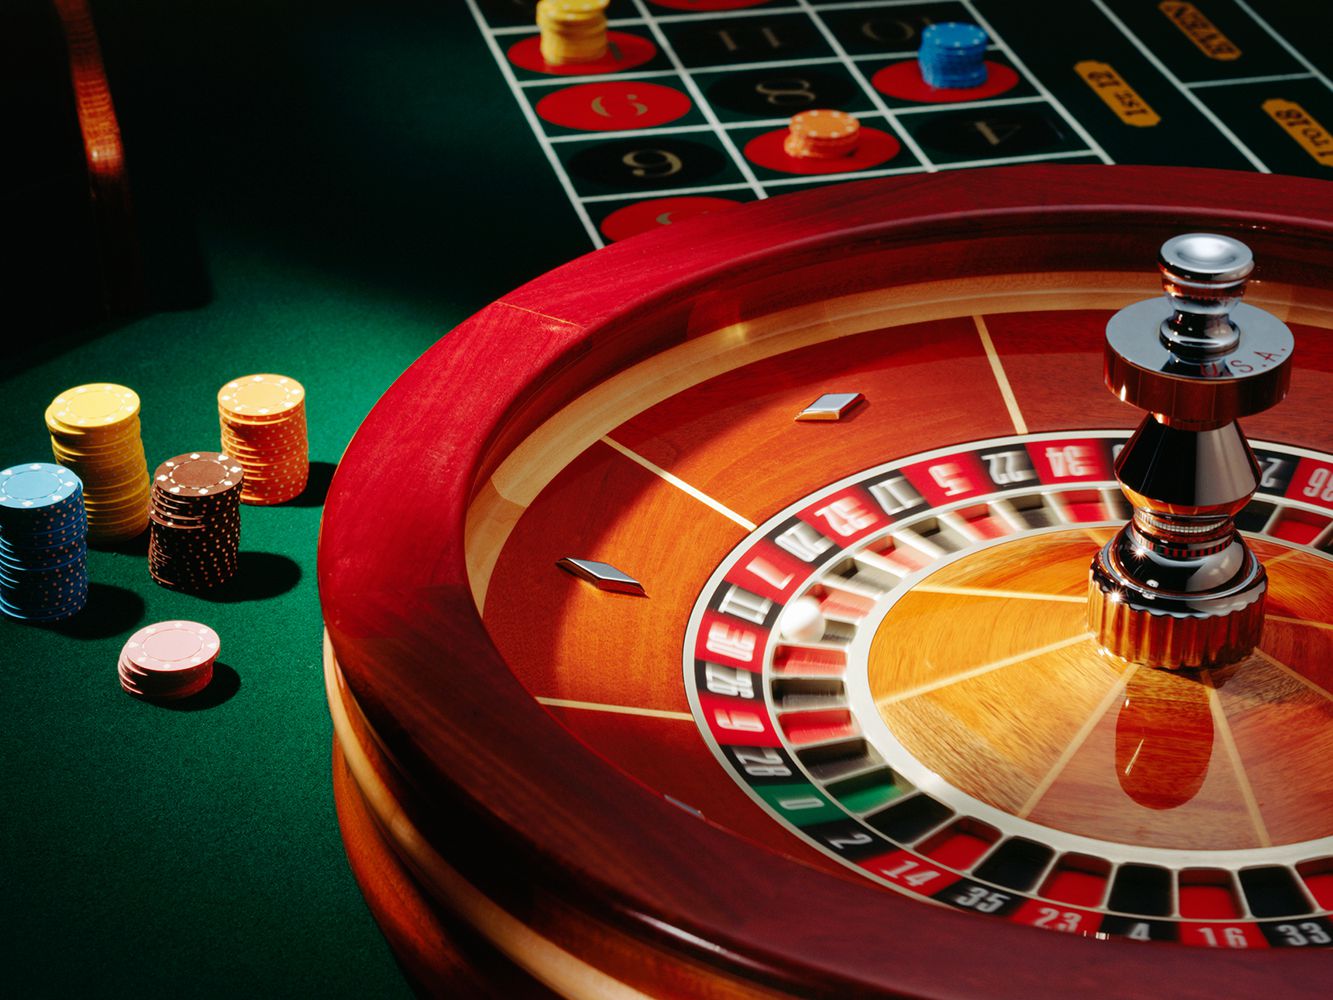 How to Play the Roulette Drinking Game Safely